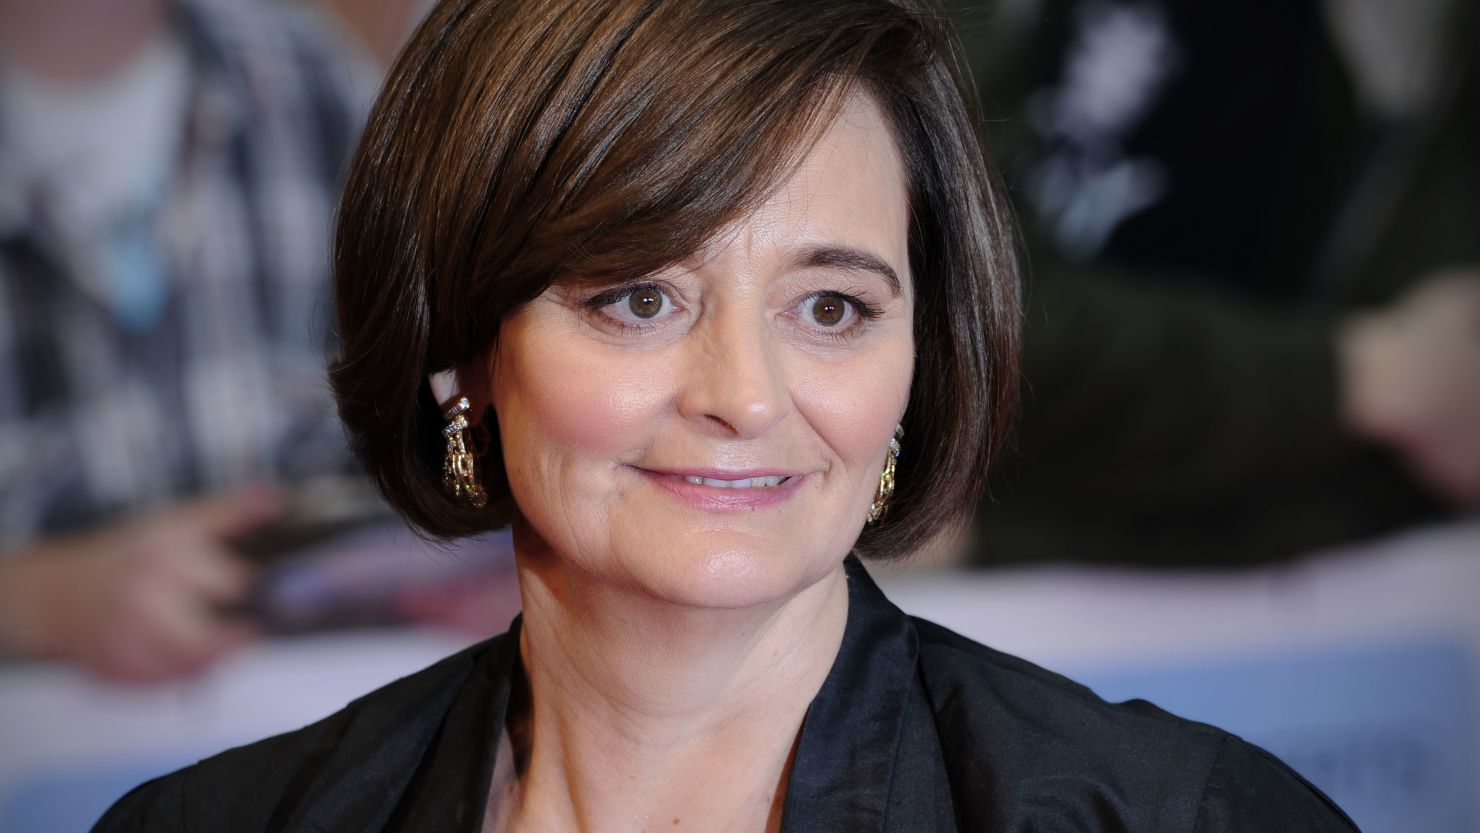 Cherie Blair attends the worldwide premier of Larry Crowne at the Westfield Shopping Center in London on June 6, 2011.